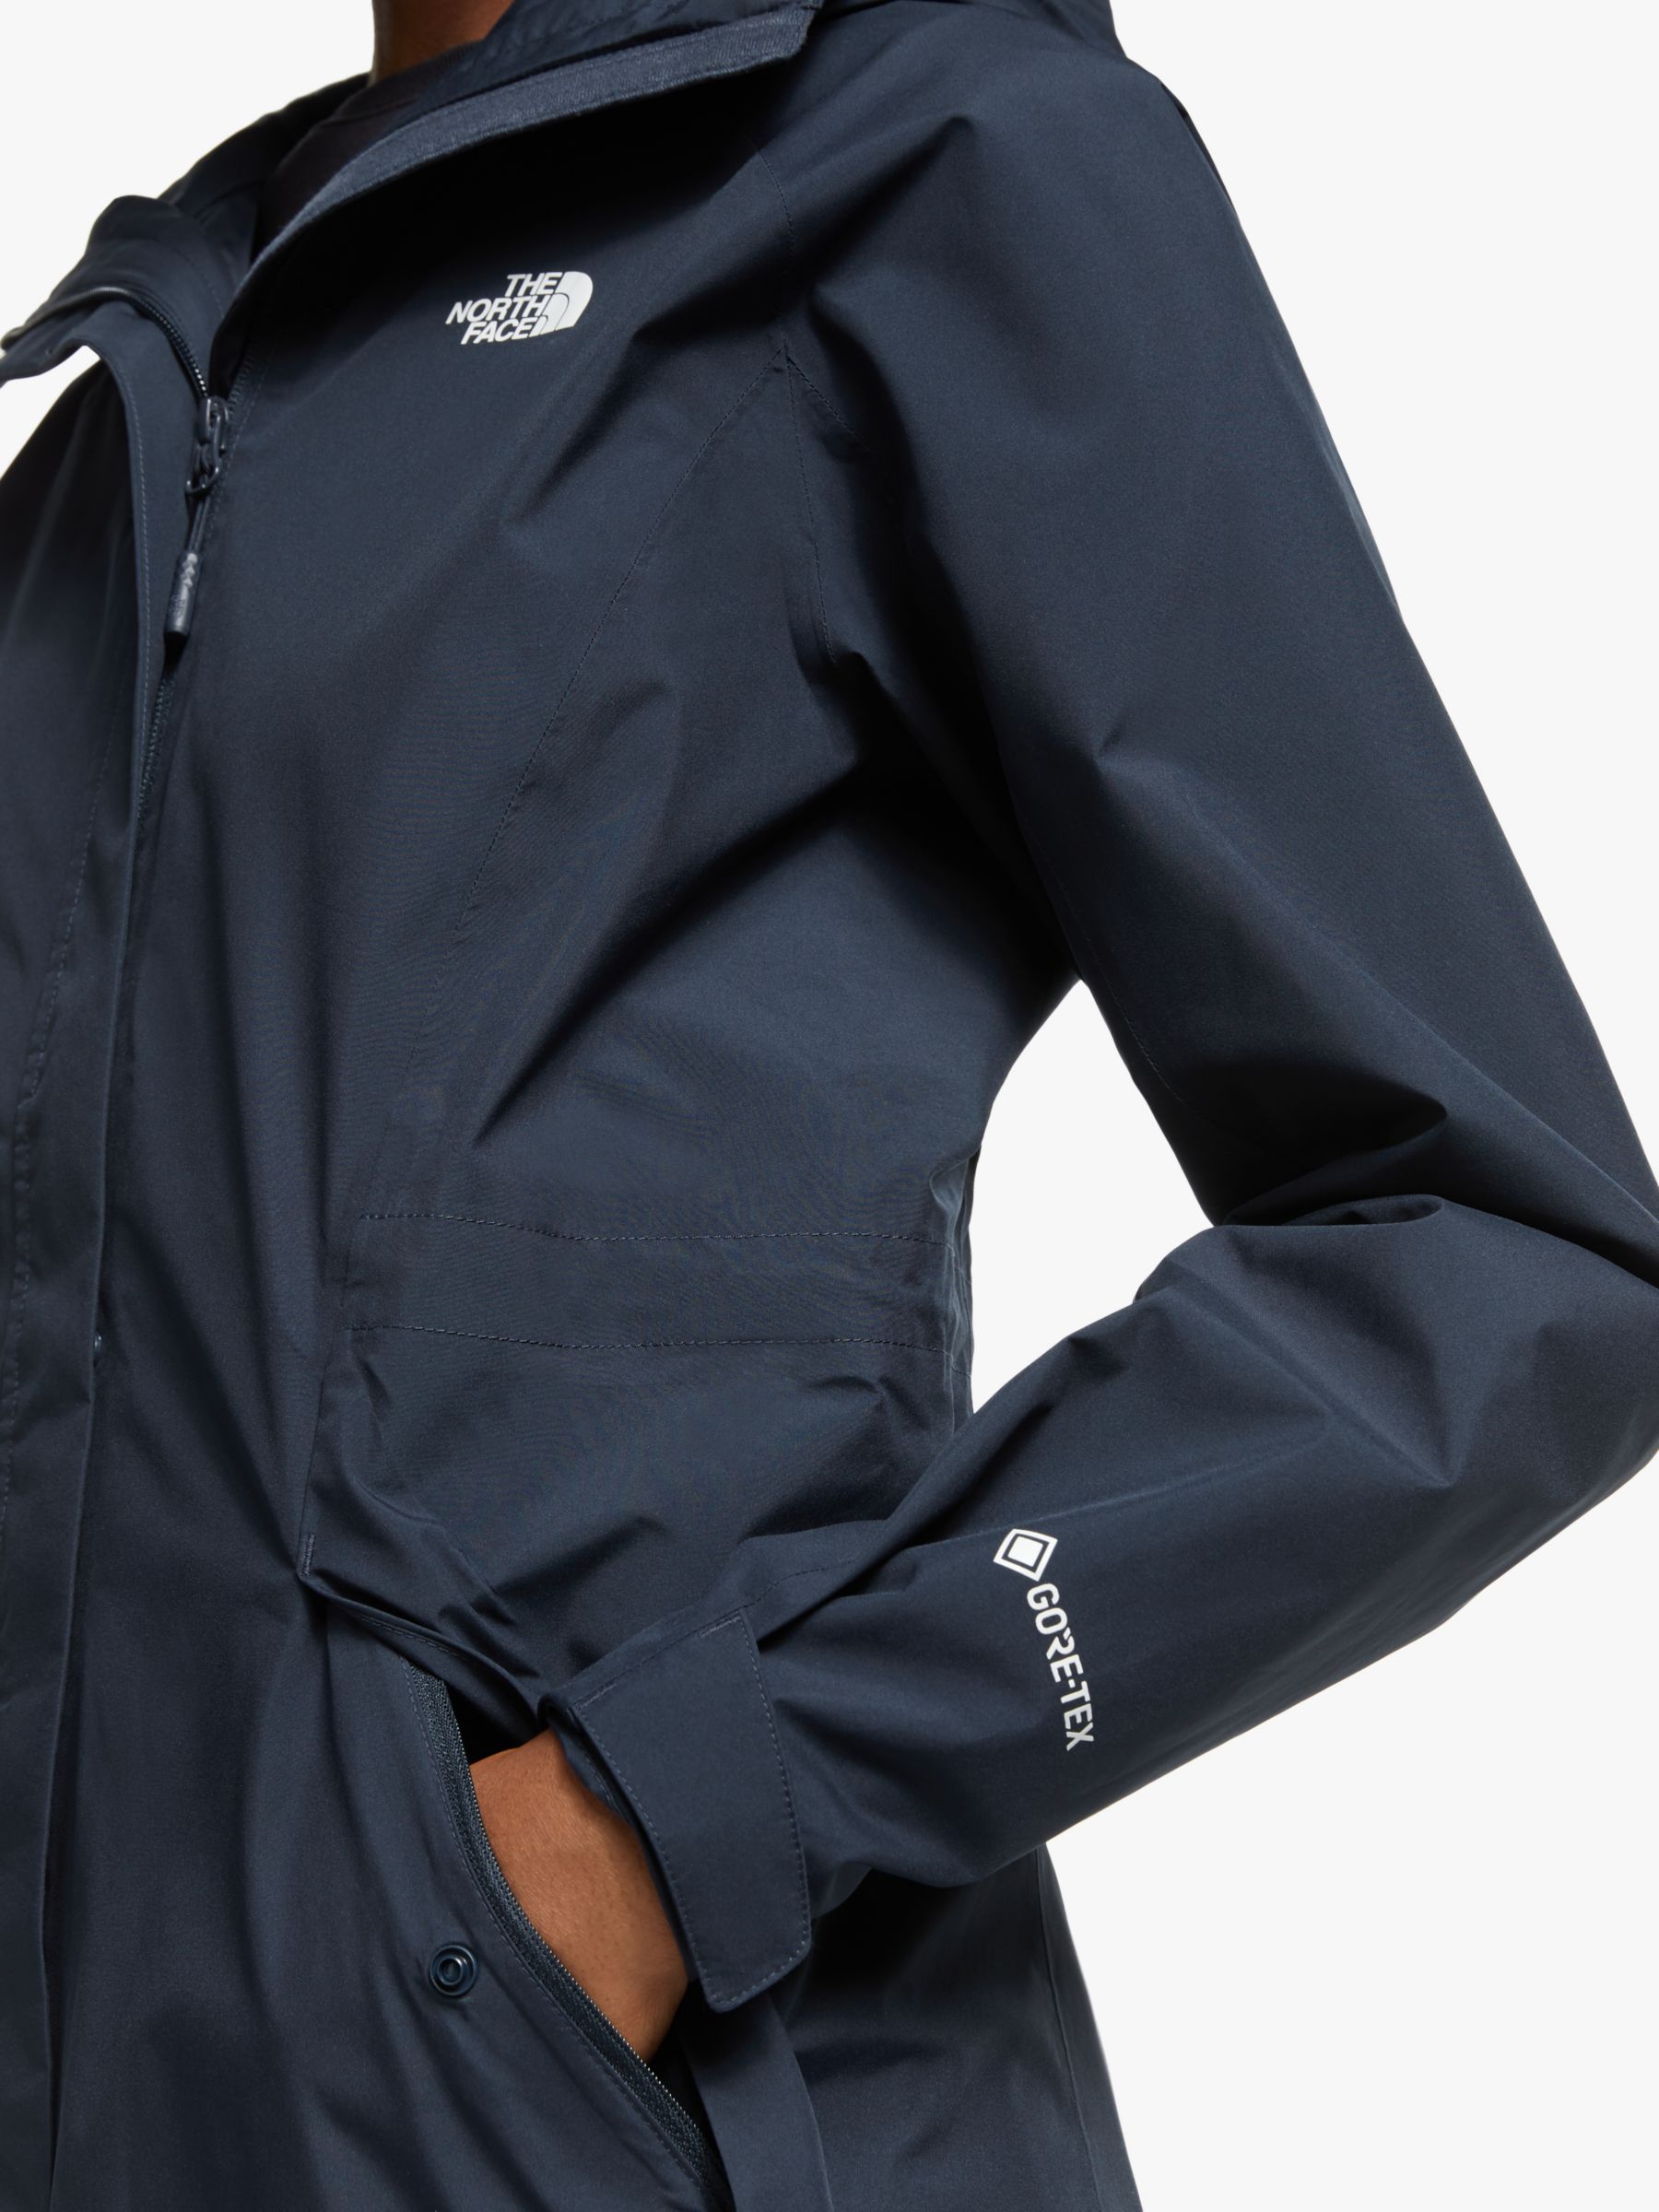 the north face gore tex womens jacket